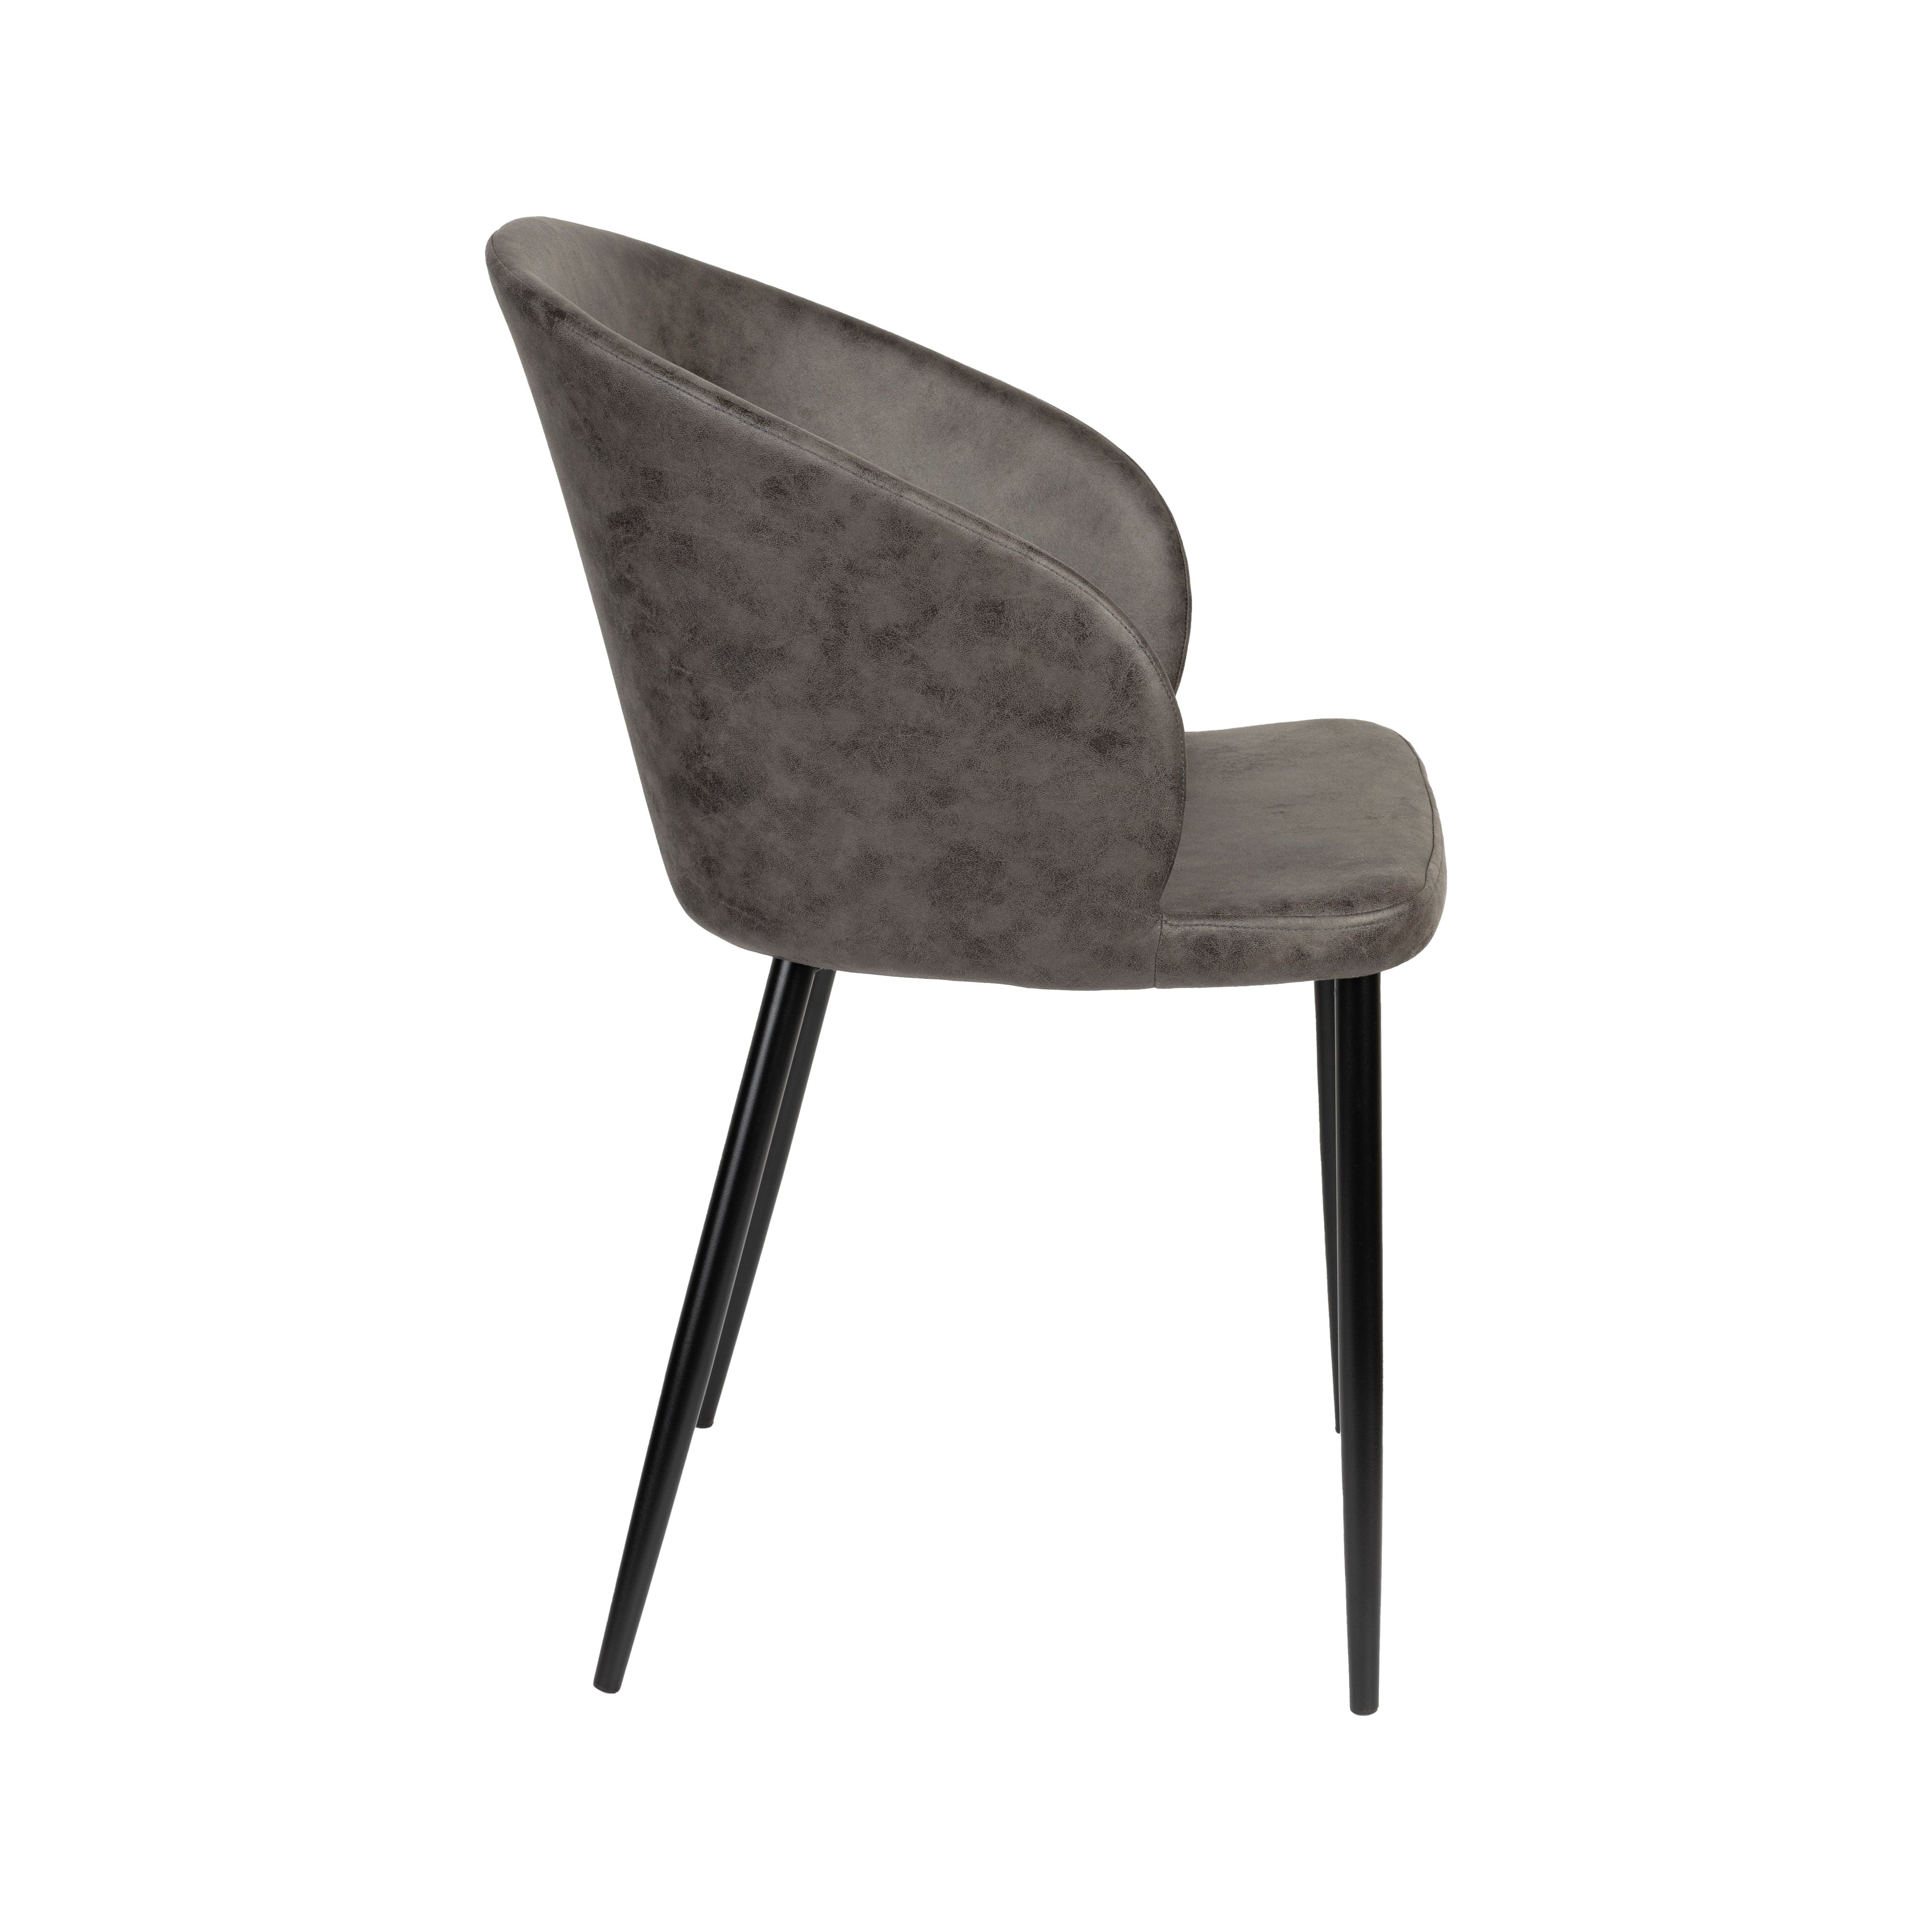 Chair hadid anthracite | 2 pieces